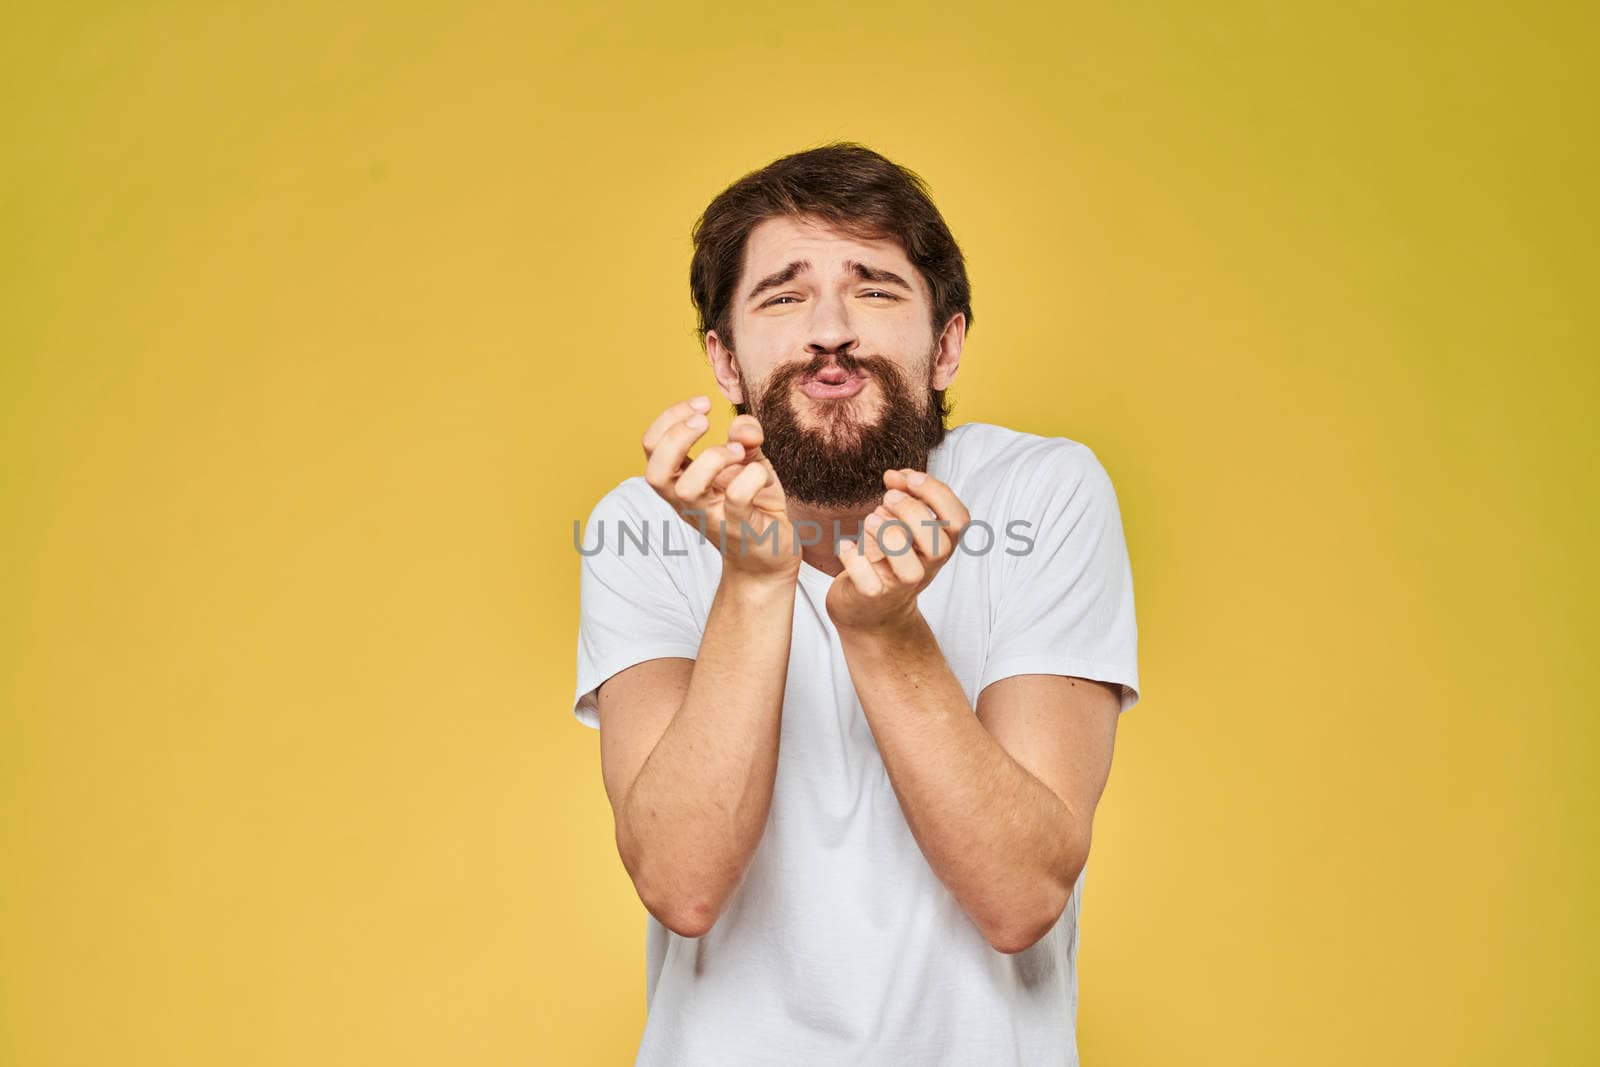 Man gesturing with hands emotions lifestyle white t-shirt yellow isolated background. High quality photo